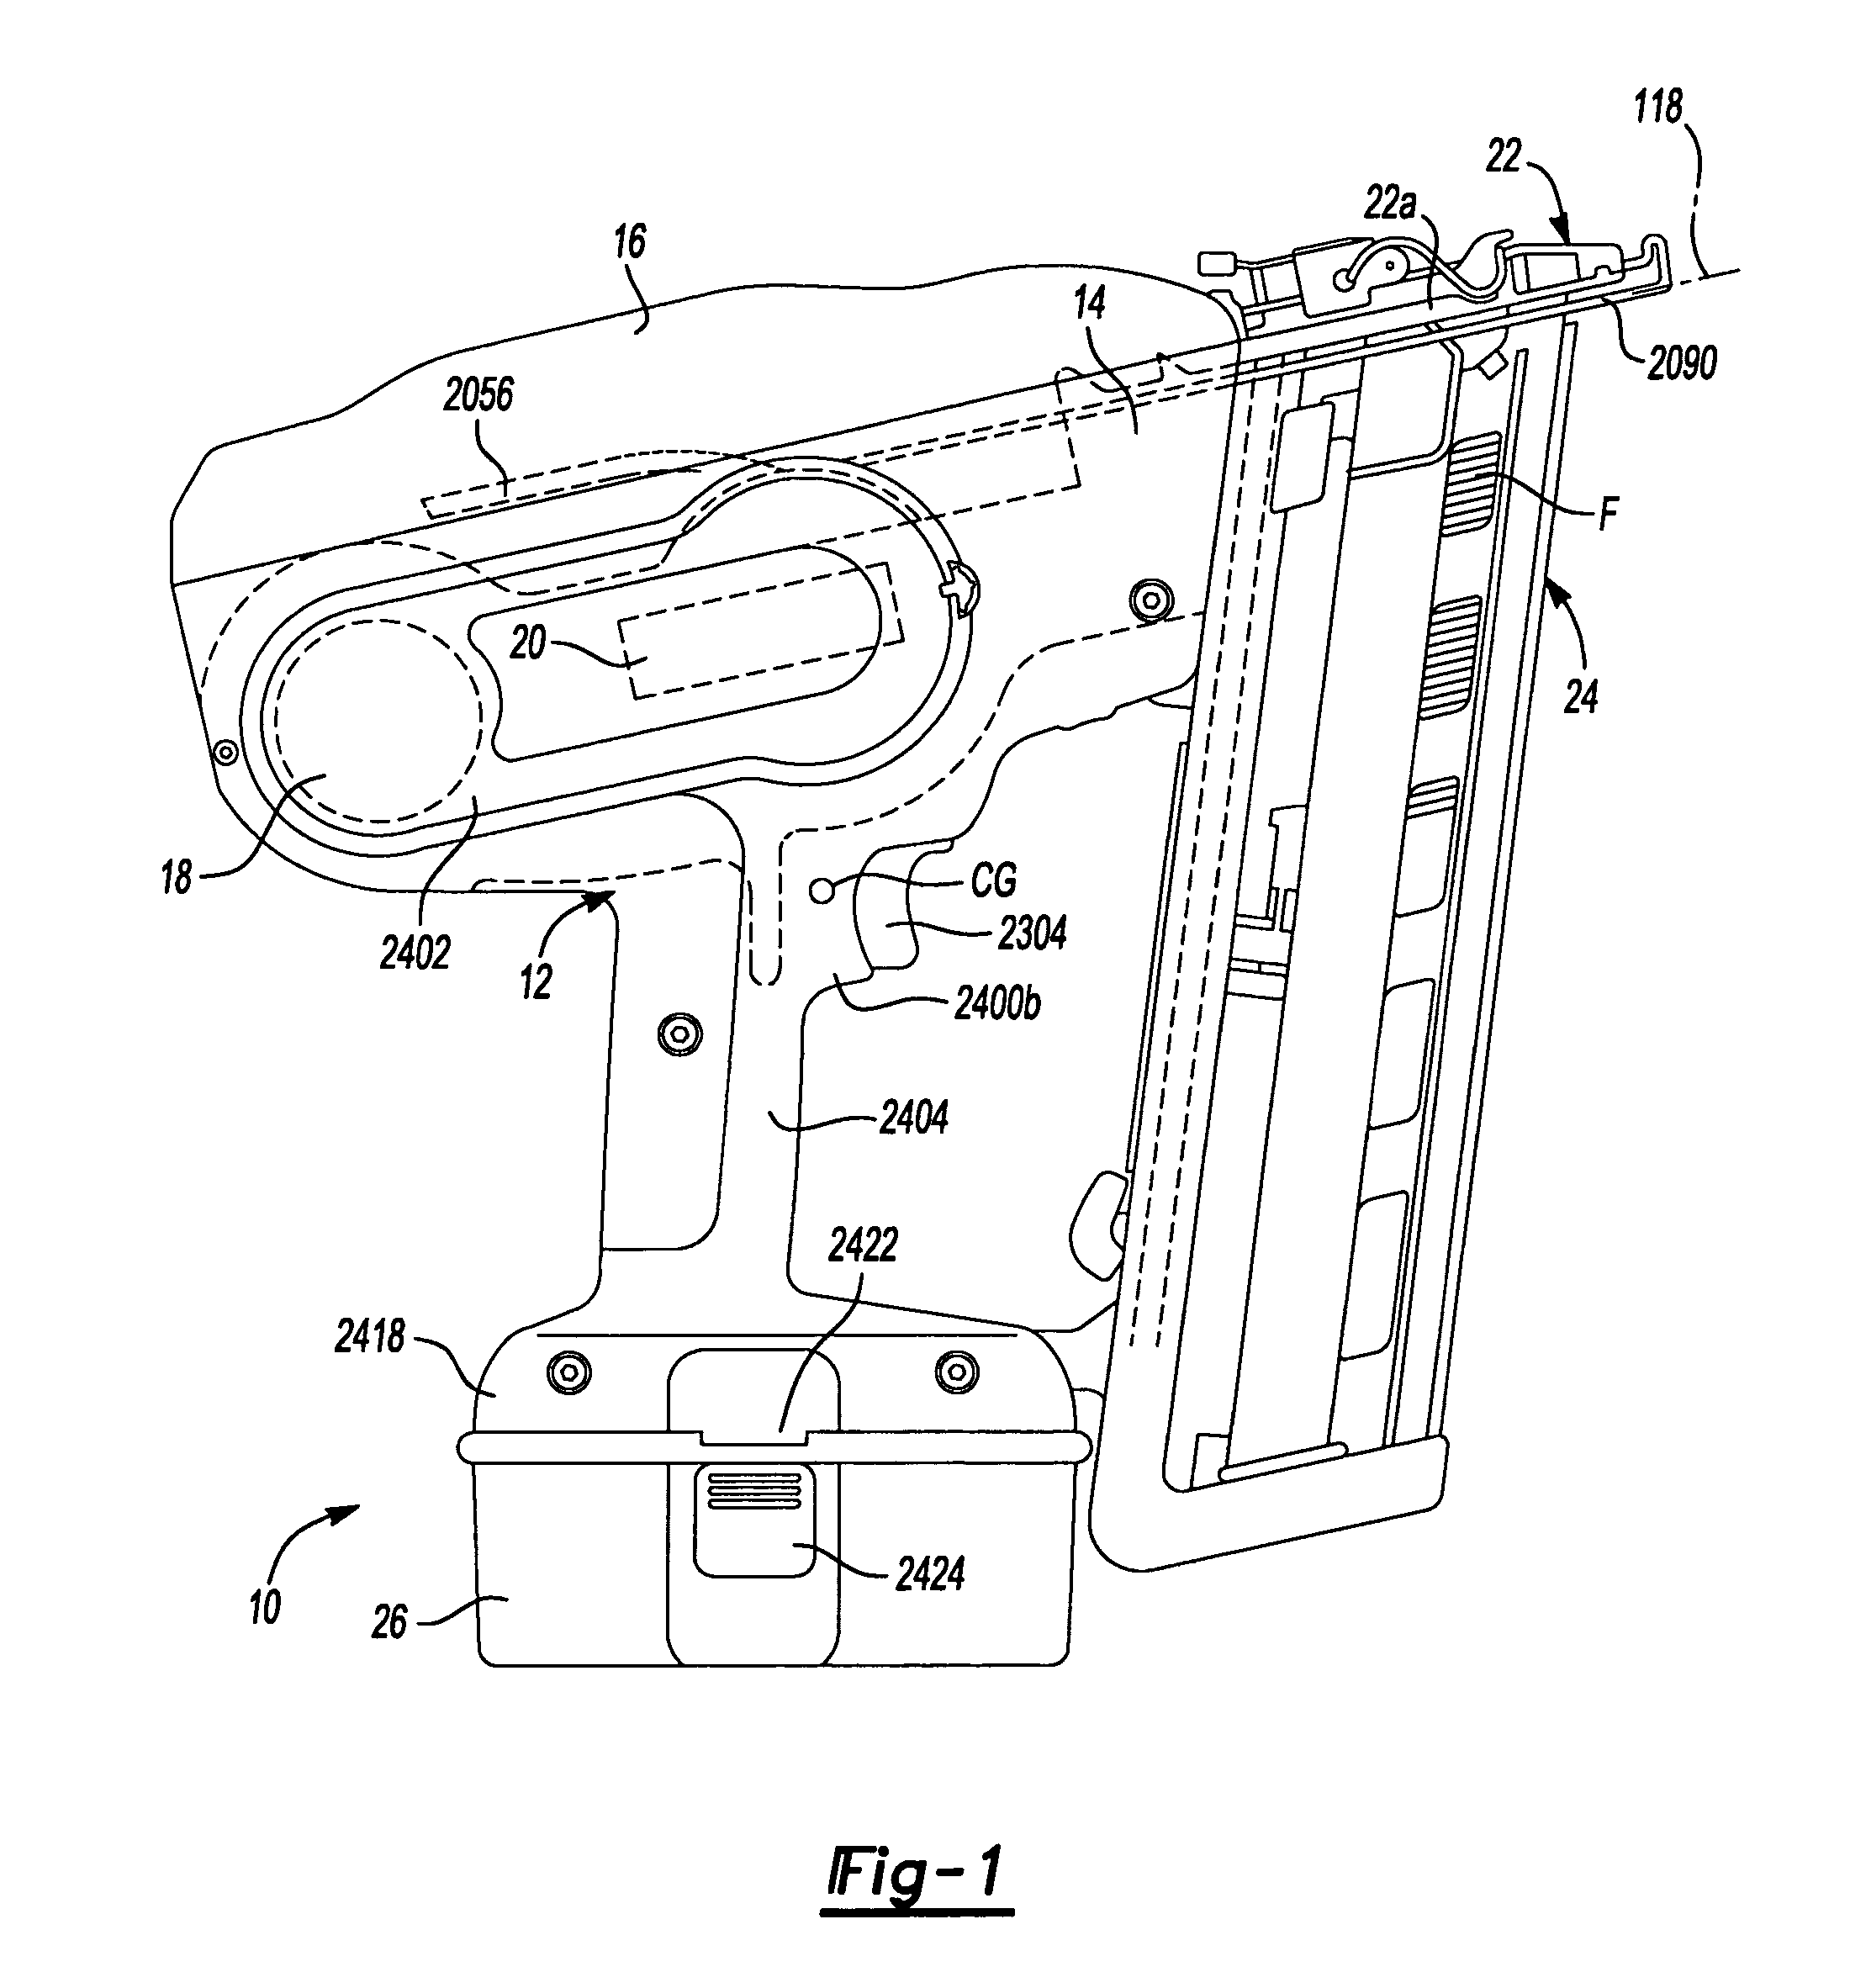 Lock-out for activation arm mechanism in a power tool